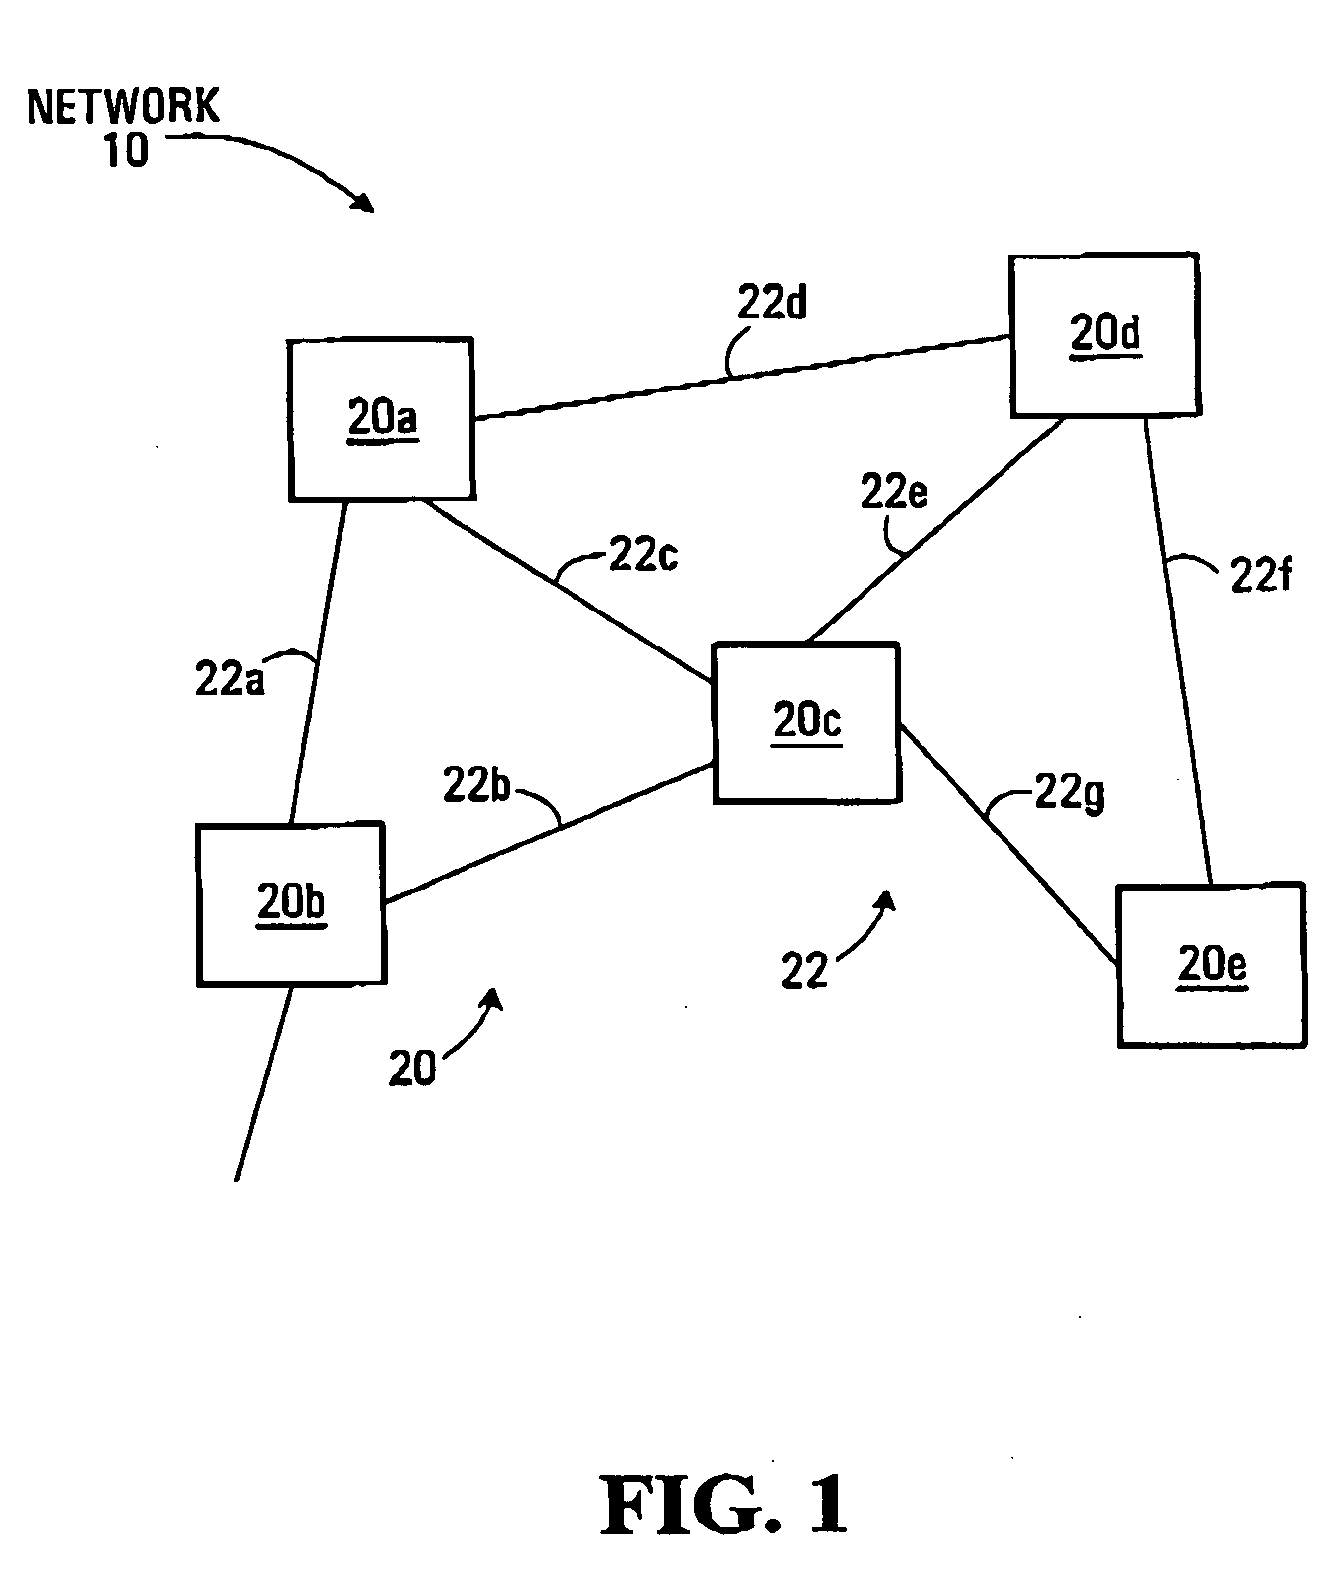 Packet-aware time division multiplexing switch with dynamically configurable switching fabric connections